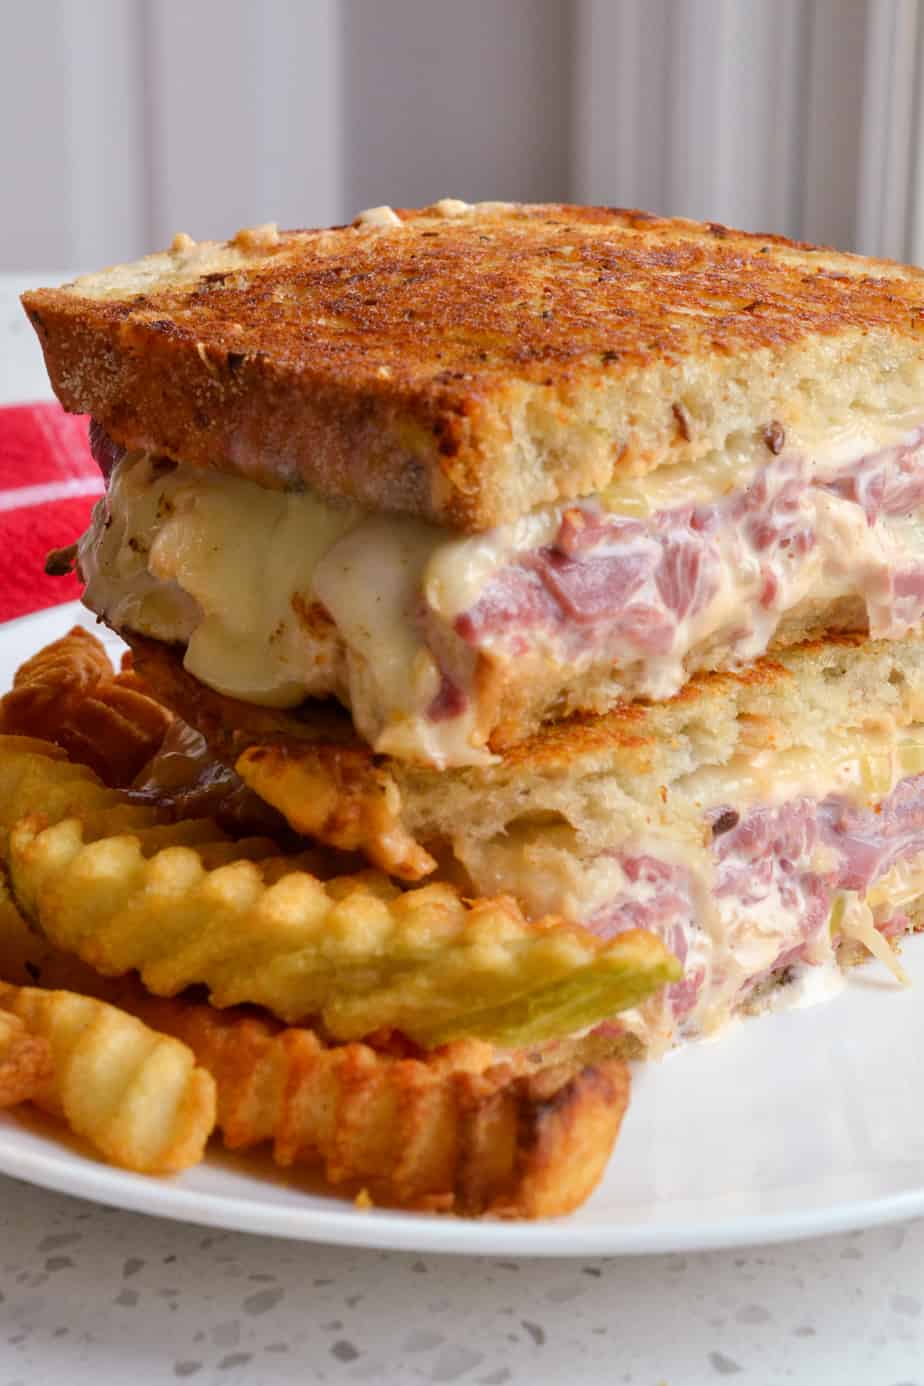 Reuben Sandwich and french fries